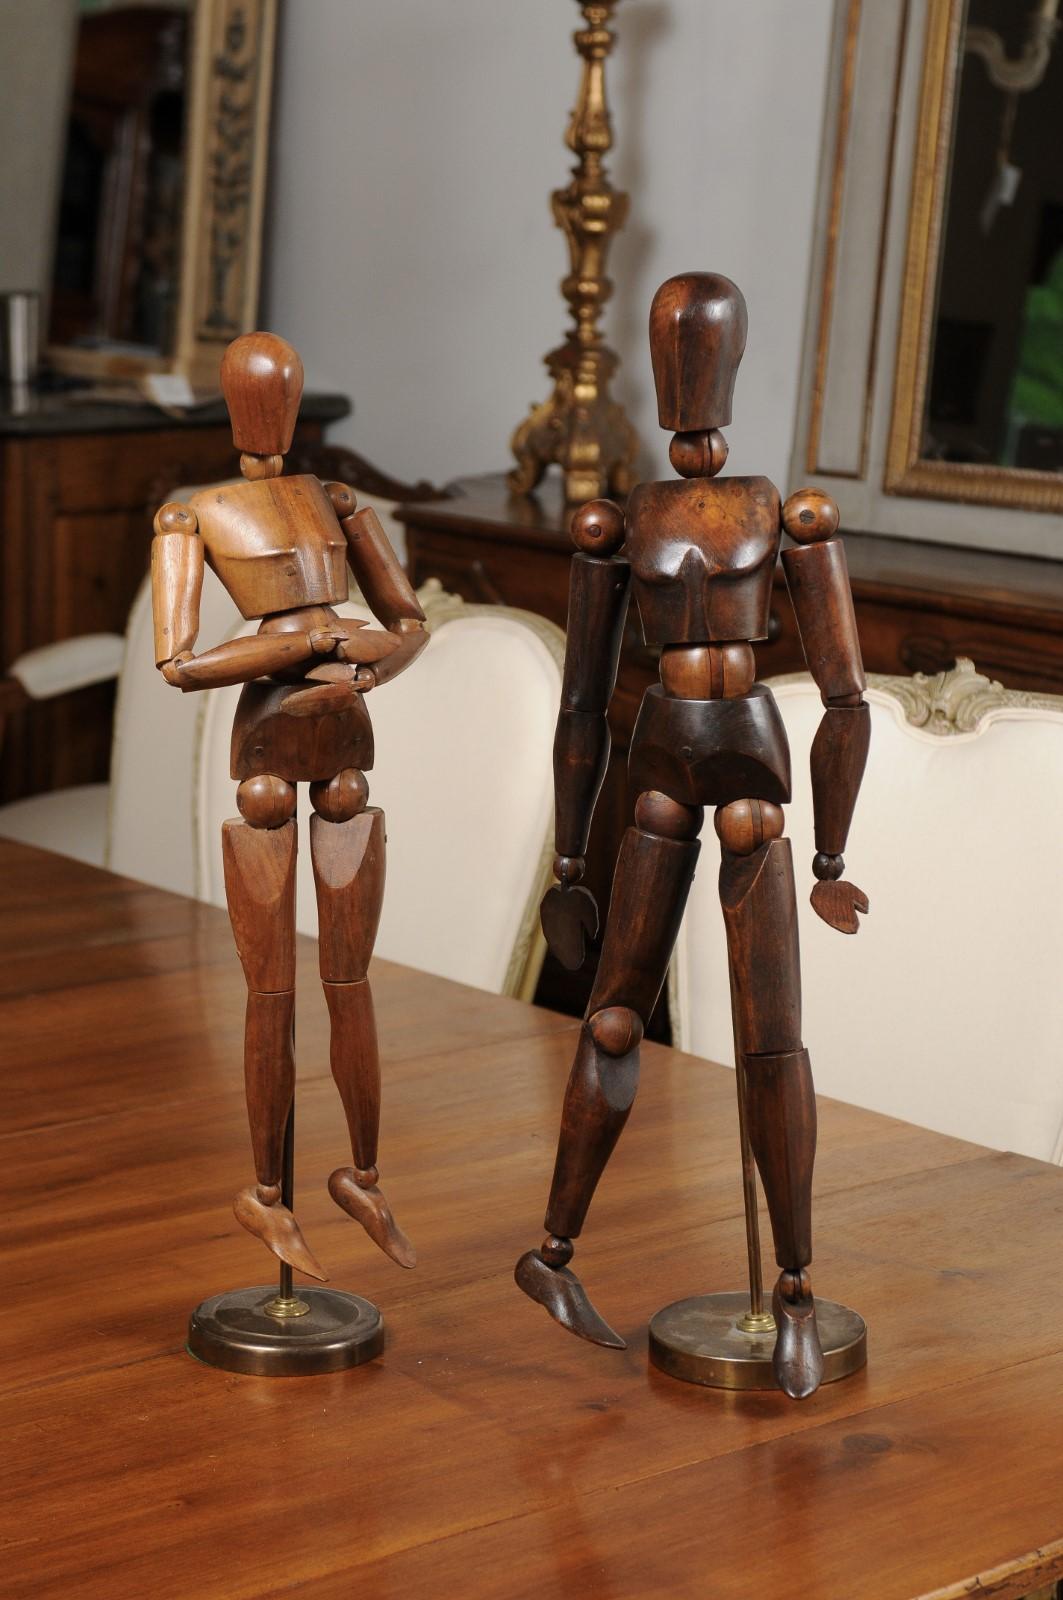 Two English artist's wooden articulated lay figure from the early 20th century, mounted on custom bases and priced $950 each. Created in England during the 20th century, these wooden pieces are reminiscent of the practice, common during the